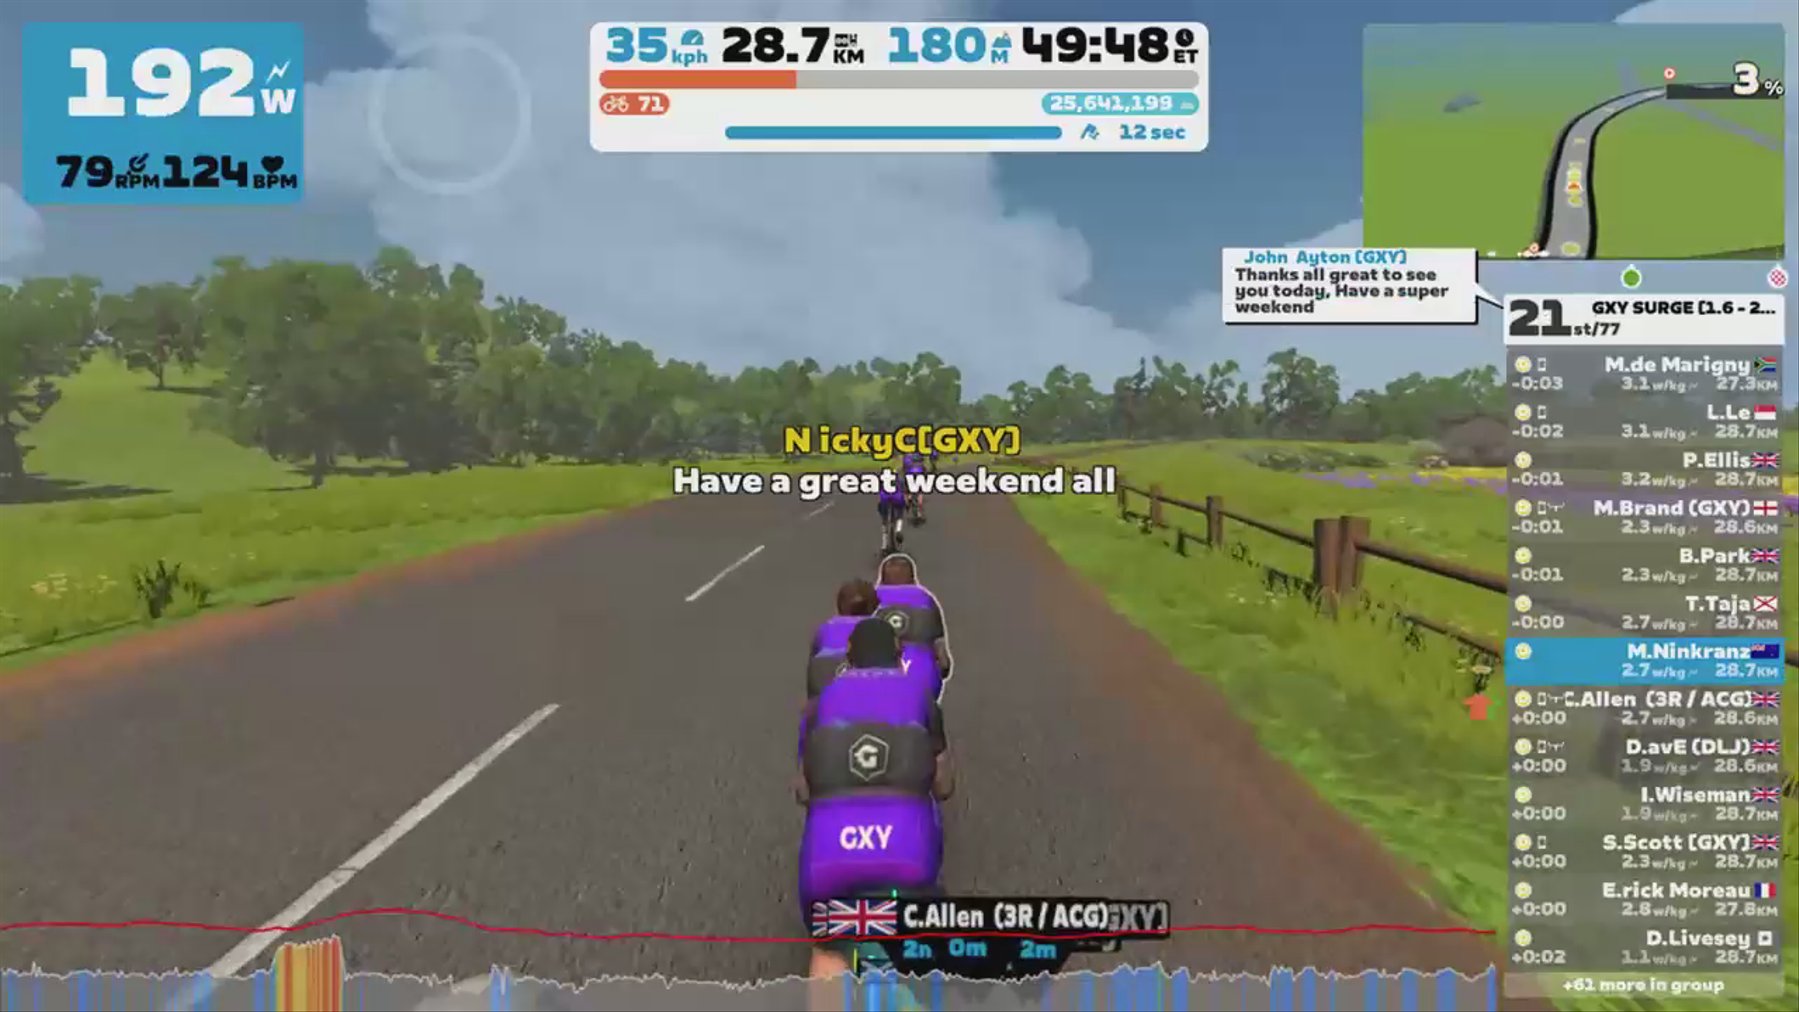 Zwift - Group Ride: GXY SURGE [1.6 - 2.5wkg] (D) on Douce France in France